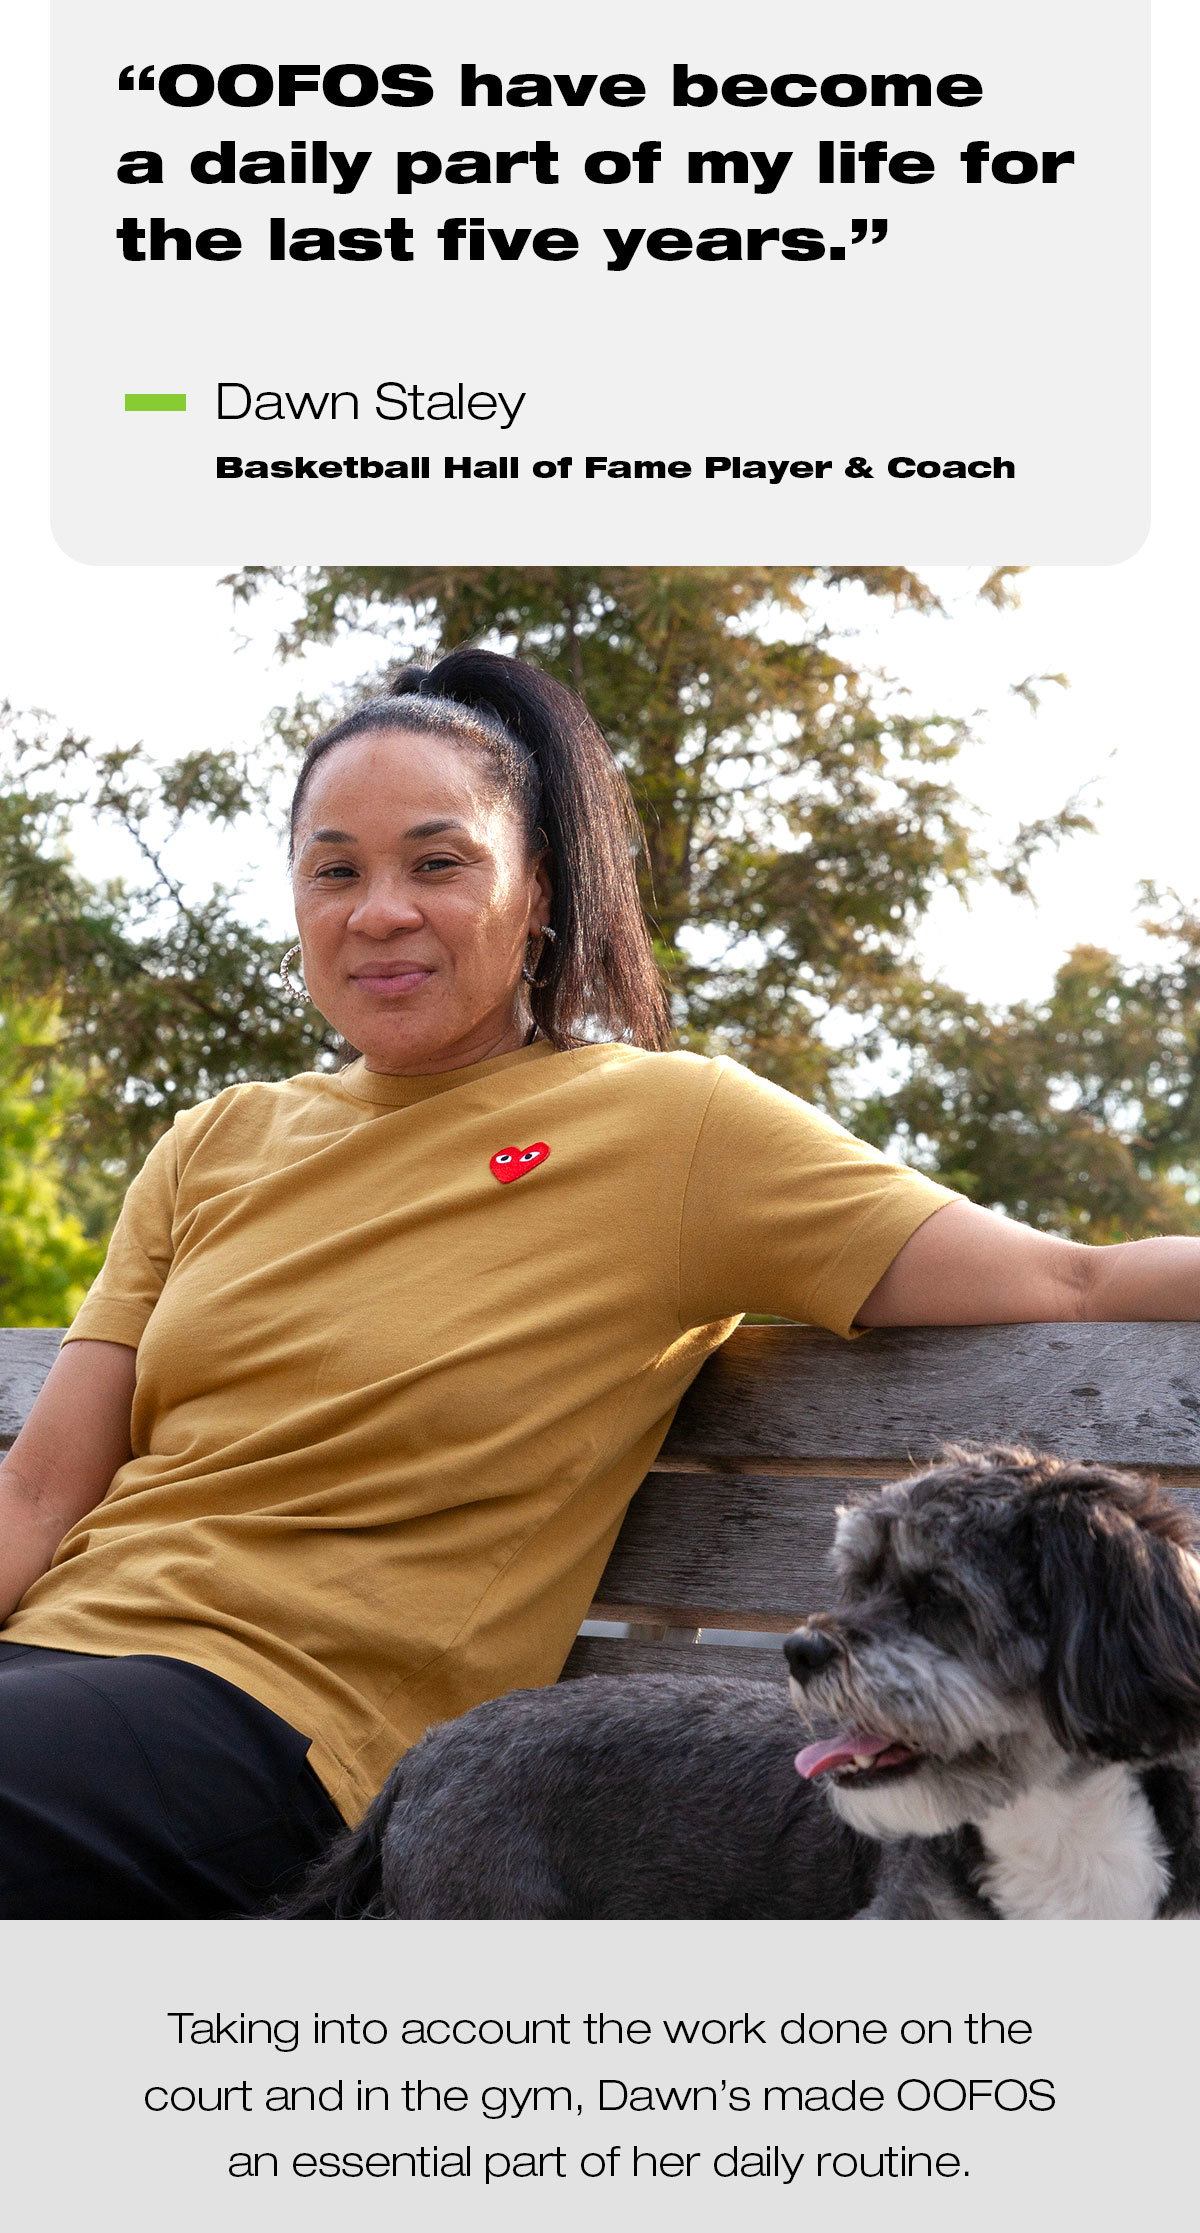 Dawn Staley Reveals What Led to Her Oofos Partnership & More – Footwear News